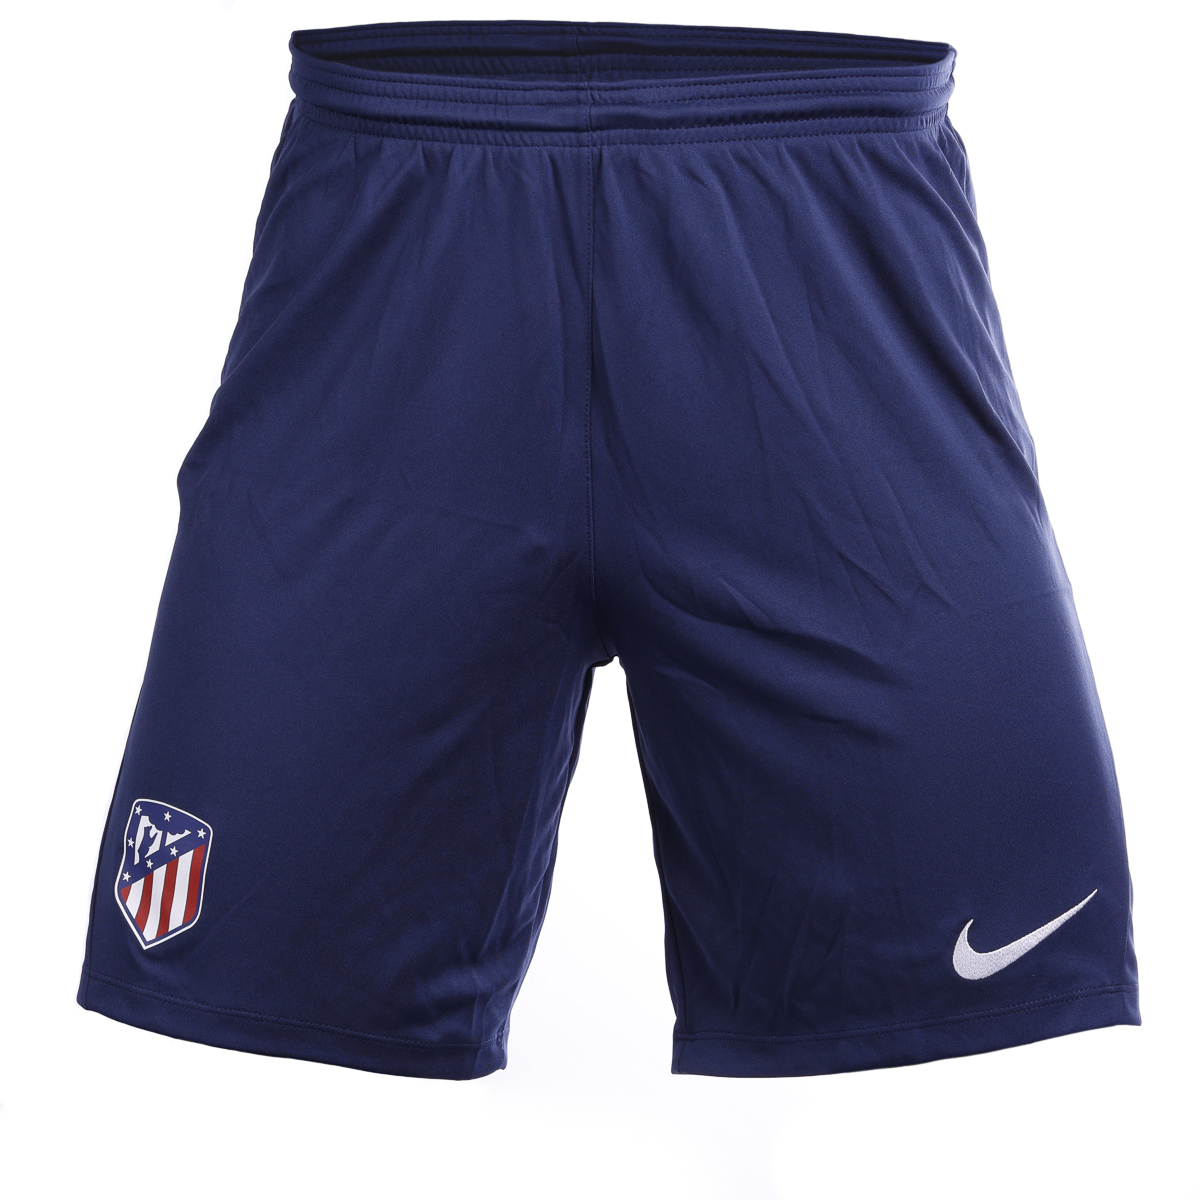 KID SHORTS FOURTH 23/24 JERSEY image number null